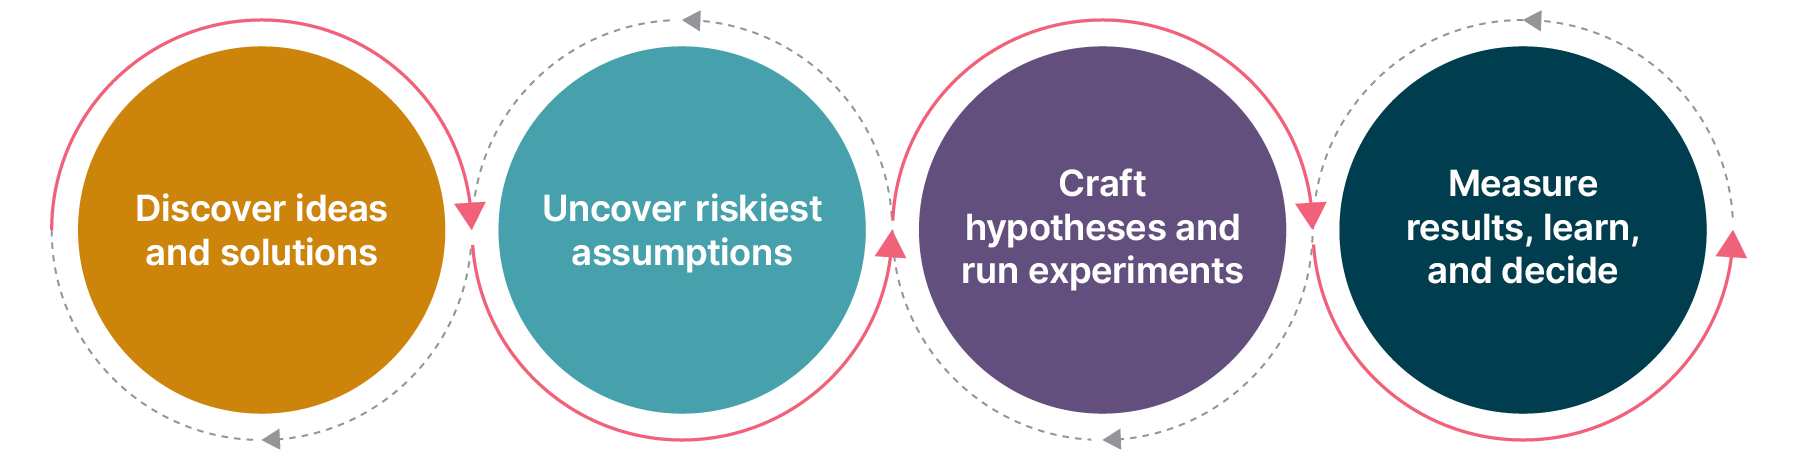 Diagram showing the four stages of experimentation: Discover ideas and solutions, Uncover riskiest assumptions, Craft hypotheses and run experiments, Measure results, learn, and decide